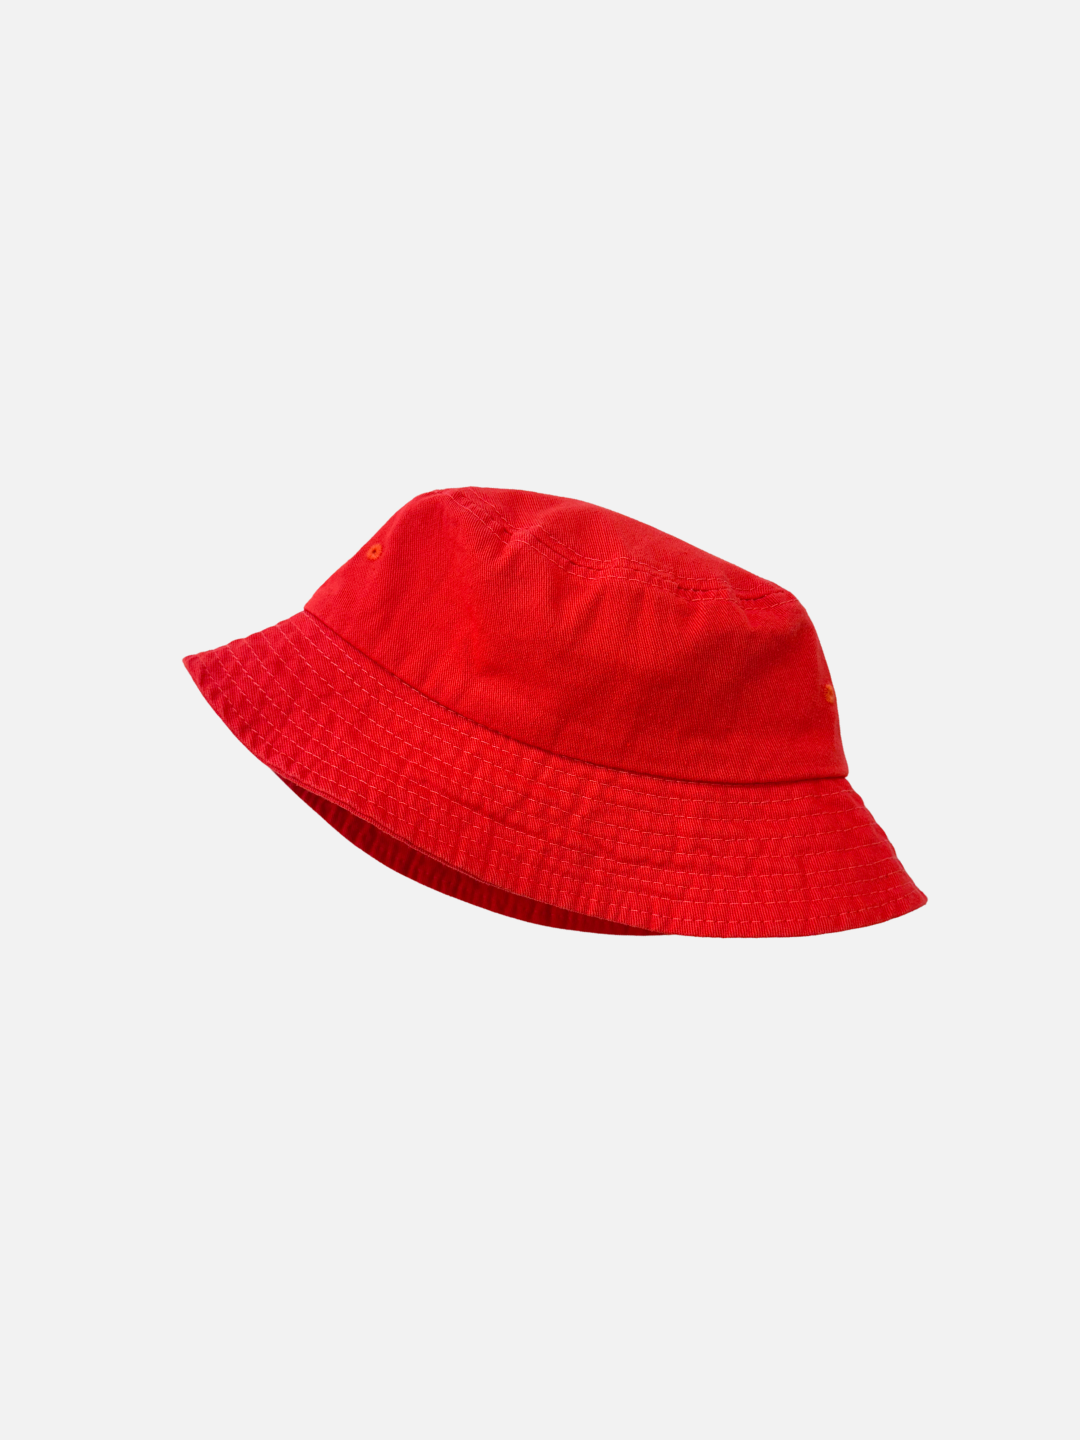 A FRONT VIEW OF KID'S PICNIC BUCKET HAT IN TOMATO ORANGE